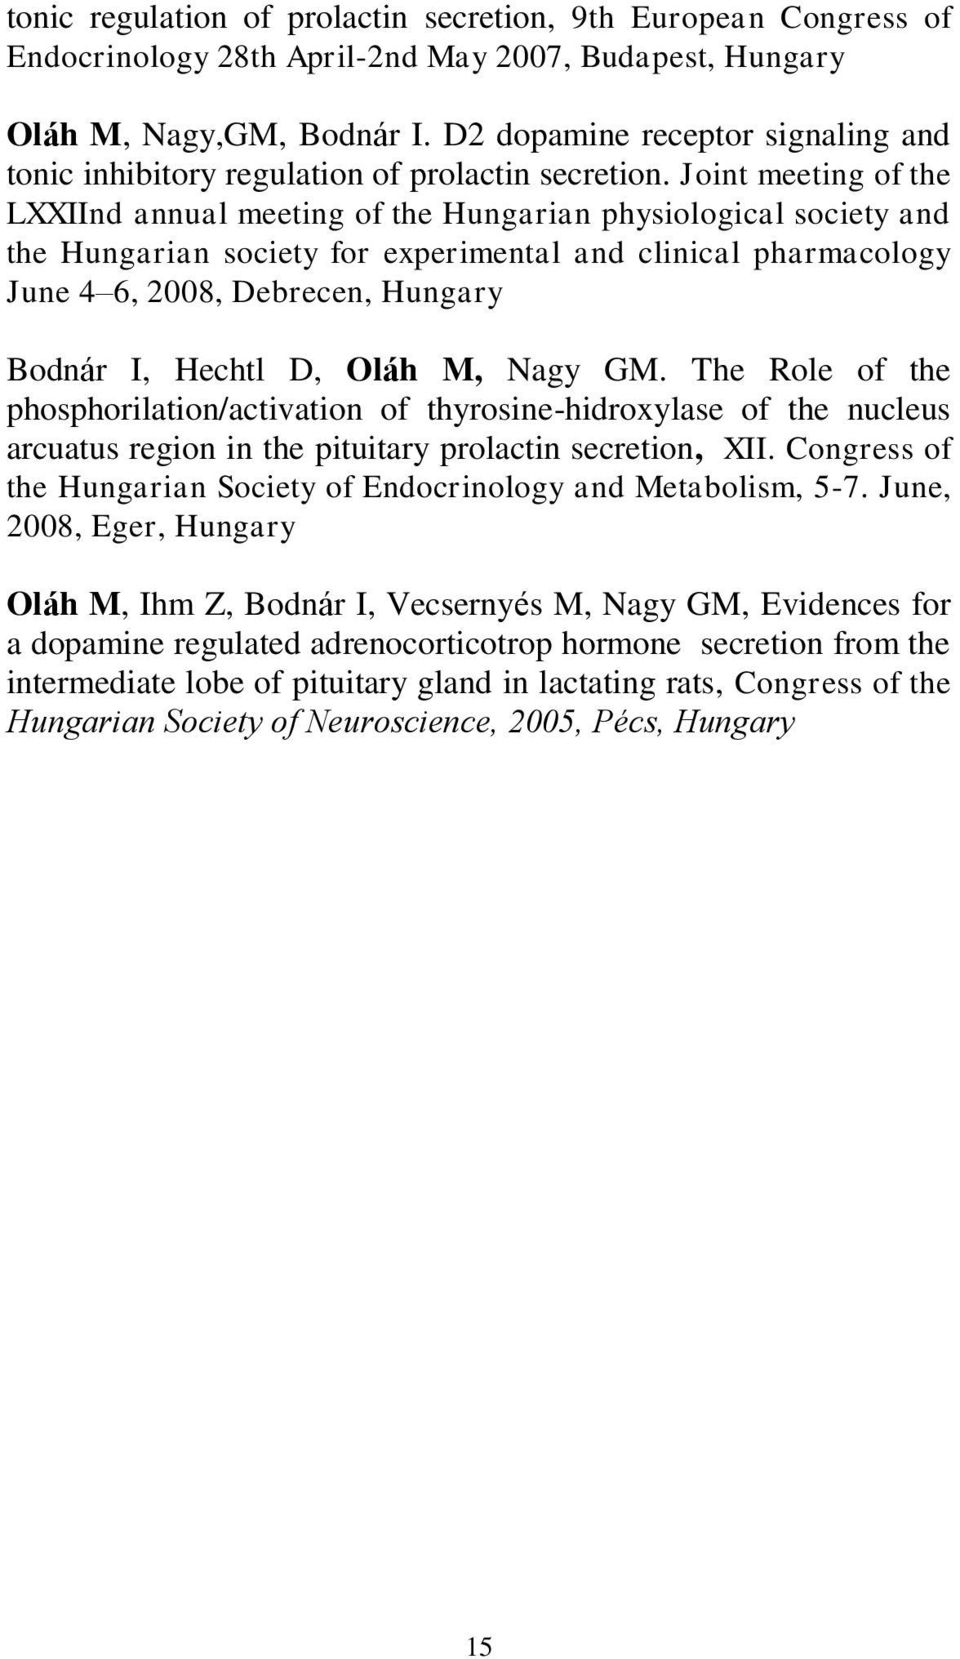 Joint meeting of the LXXIInd annual meeting of the Hungarian physiological society and the Hungarian society for experimental and clinical pharmacology June 4 6, 2008, Debrecen, Hungary Bodnár I,